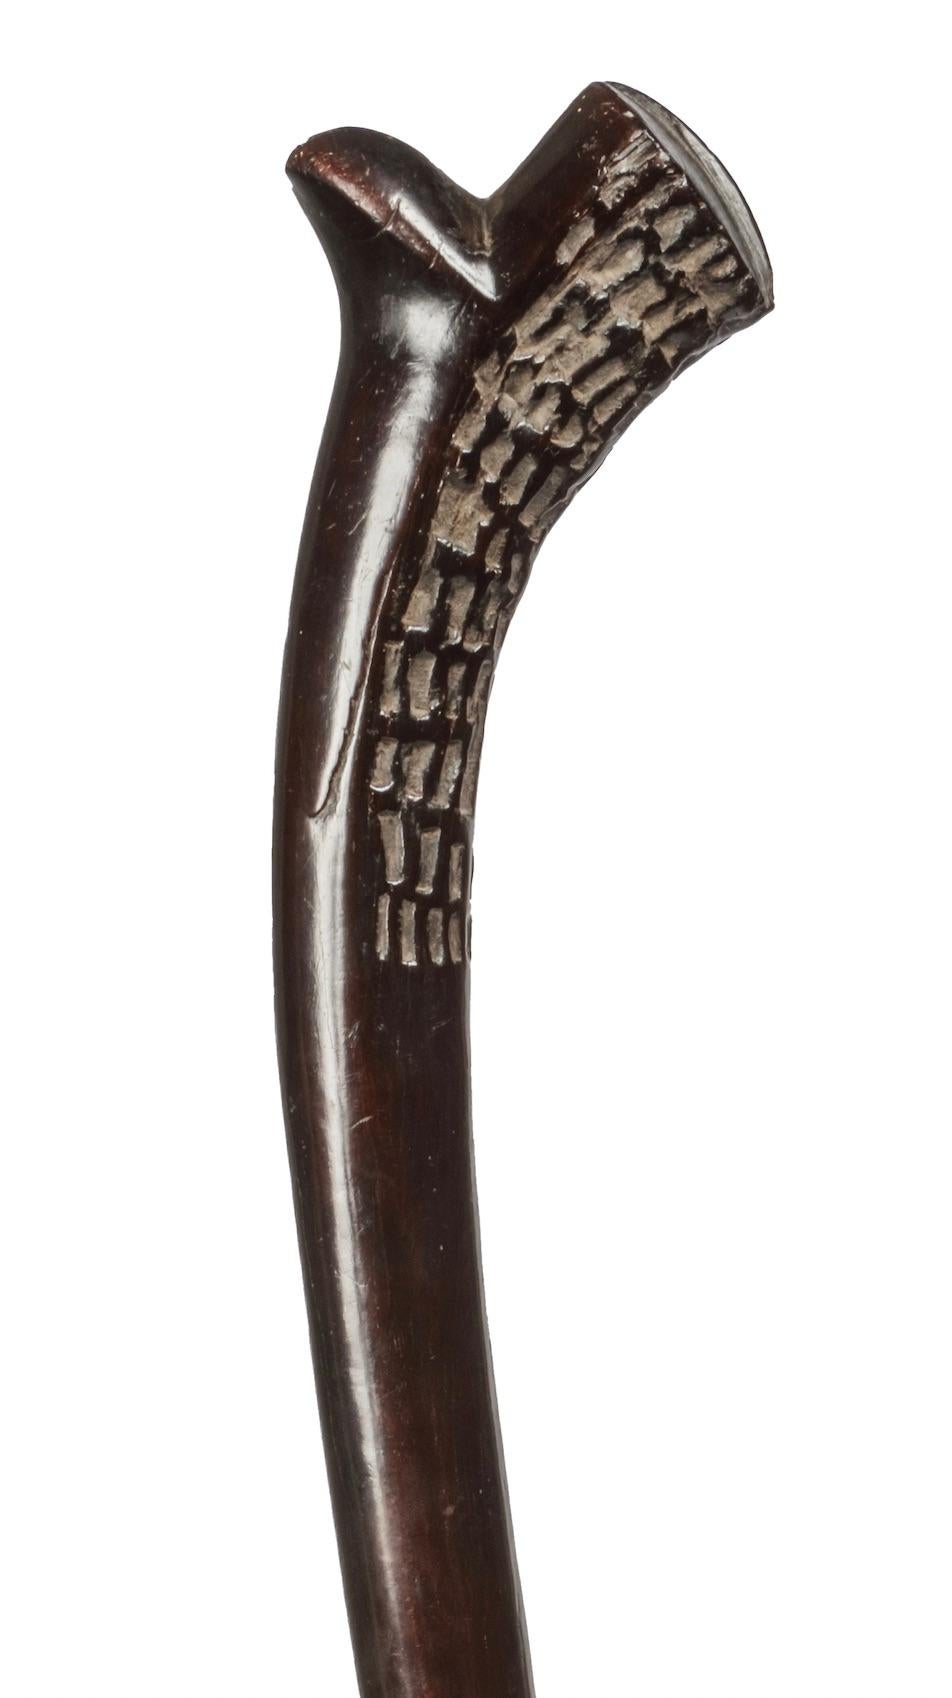 A Polynesian ironwood Gata waka or war club
Fiji, probably 18th century or earlier

Measures: Height. 97 cm
 
Including museum-quality powder-coated stand.

Provenance:
Private collection, France

Polynesian culture is traditionally a